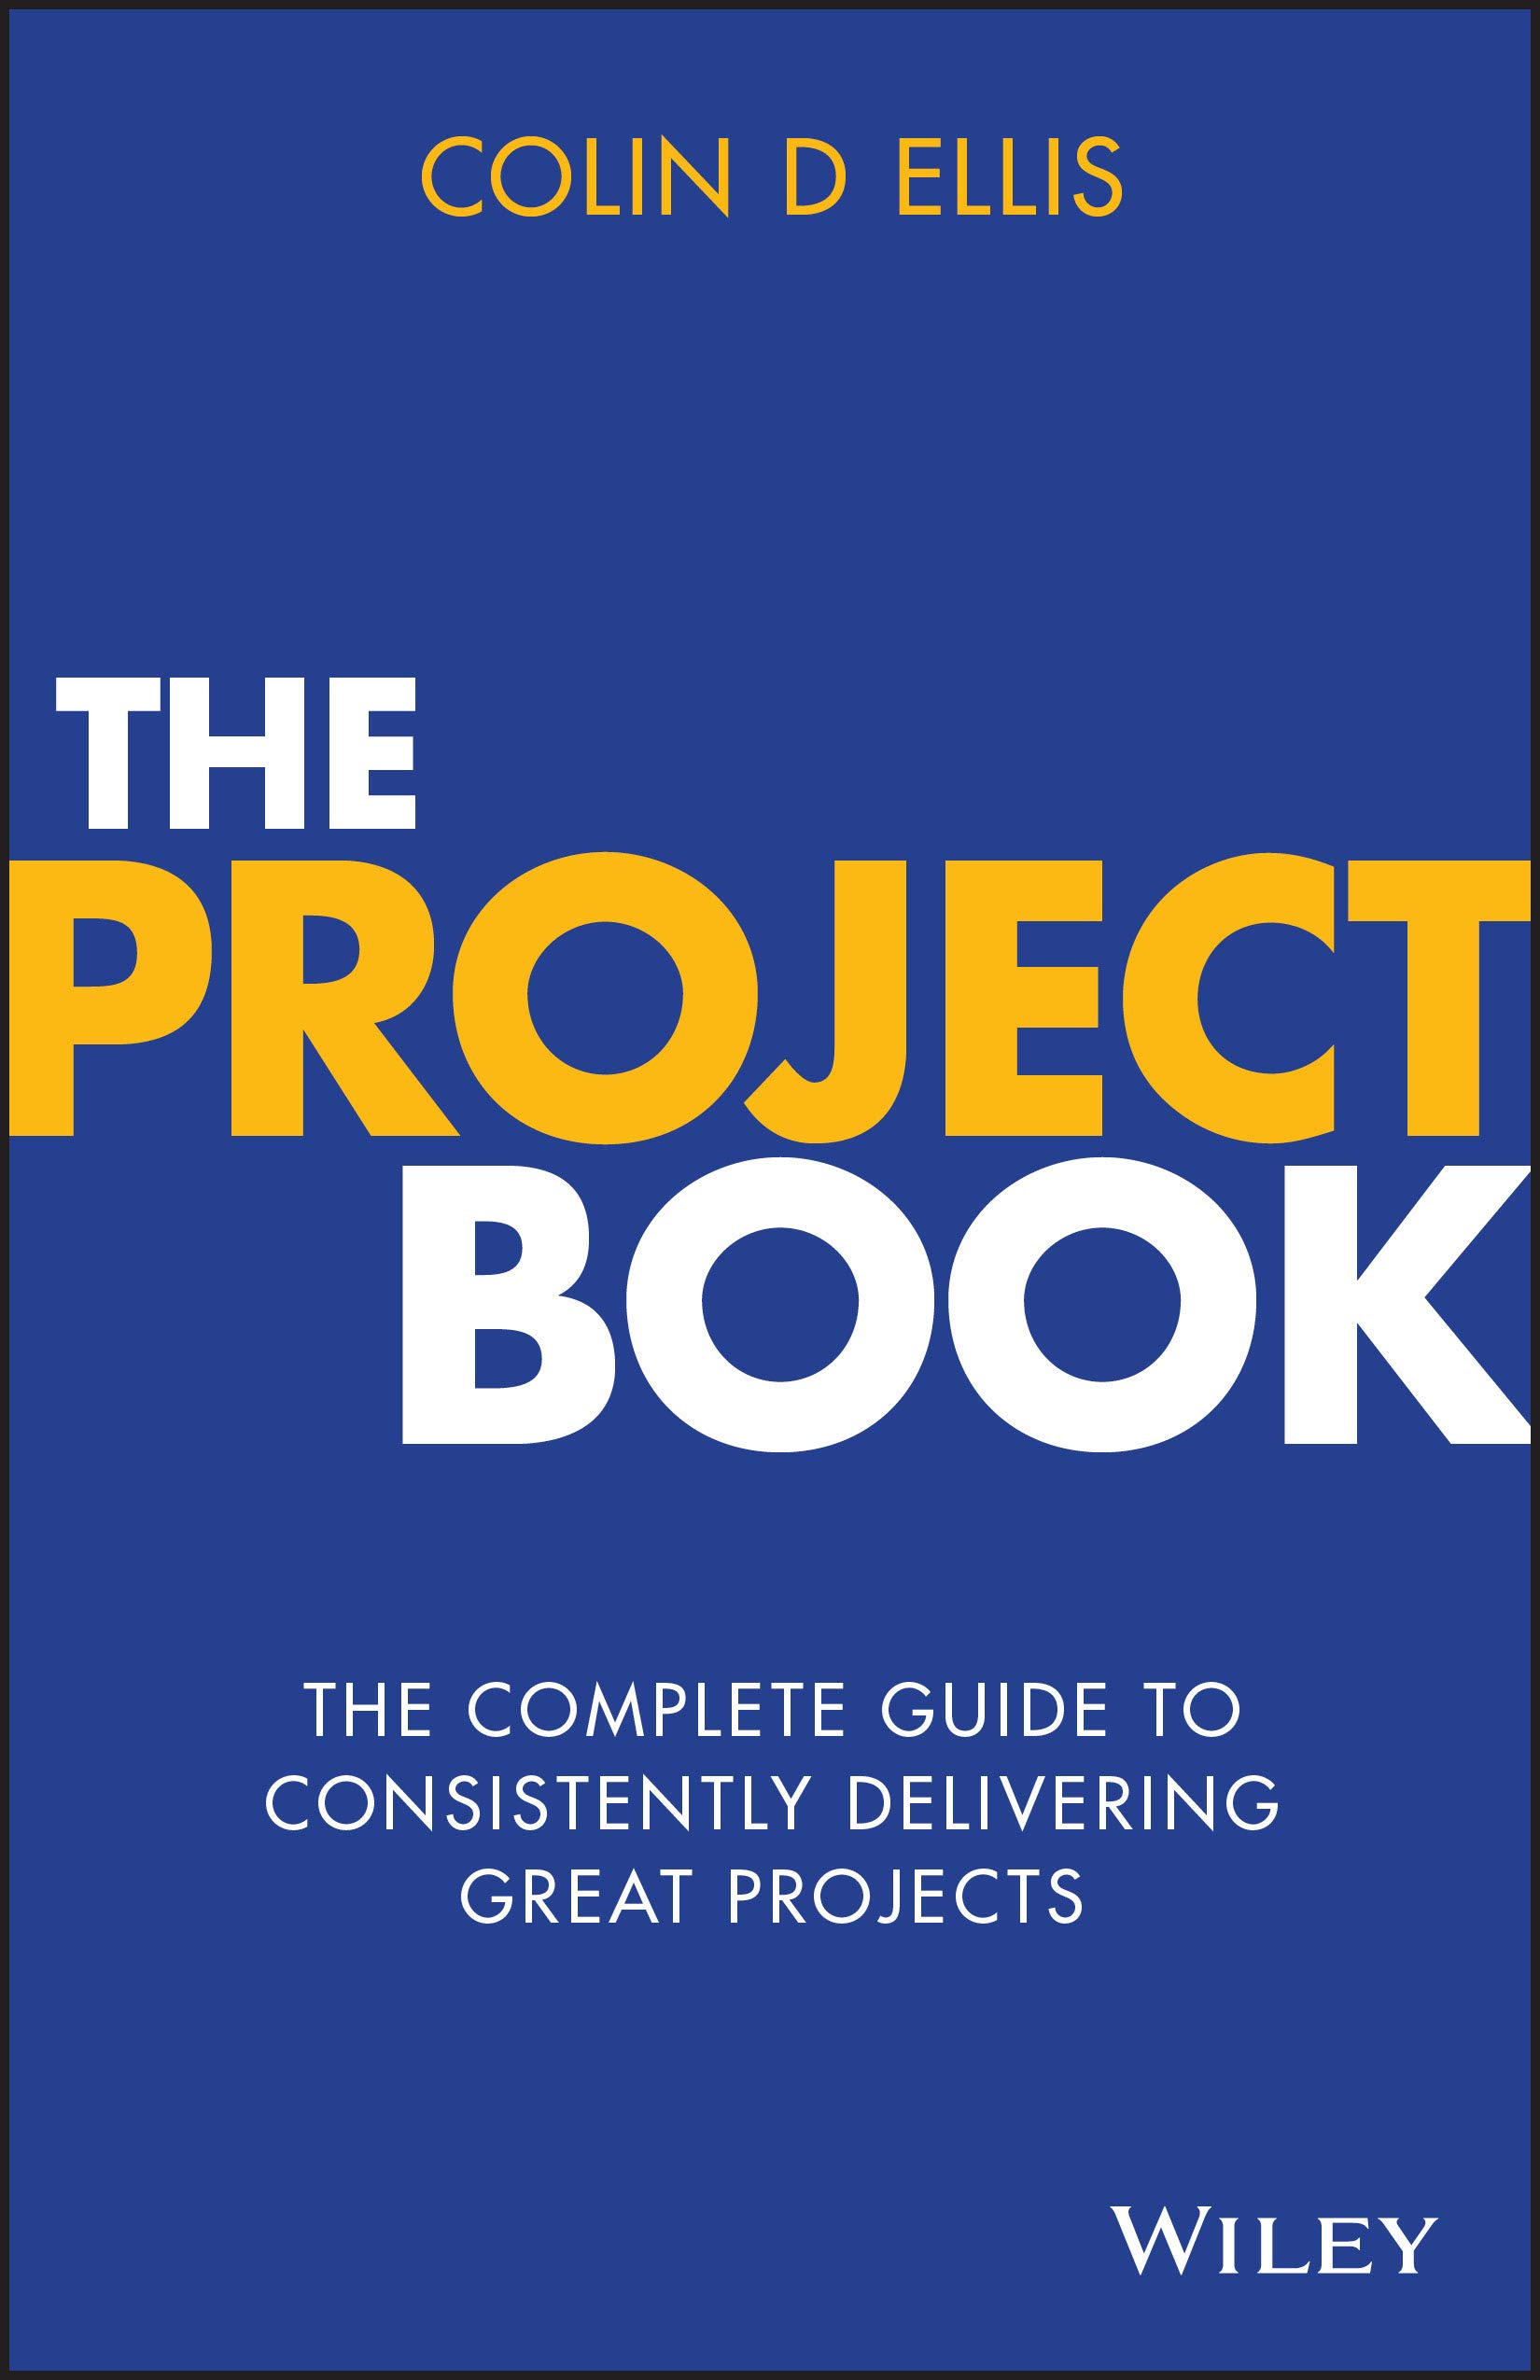 the 1867 project book review